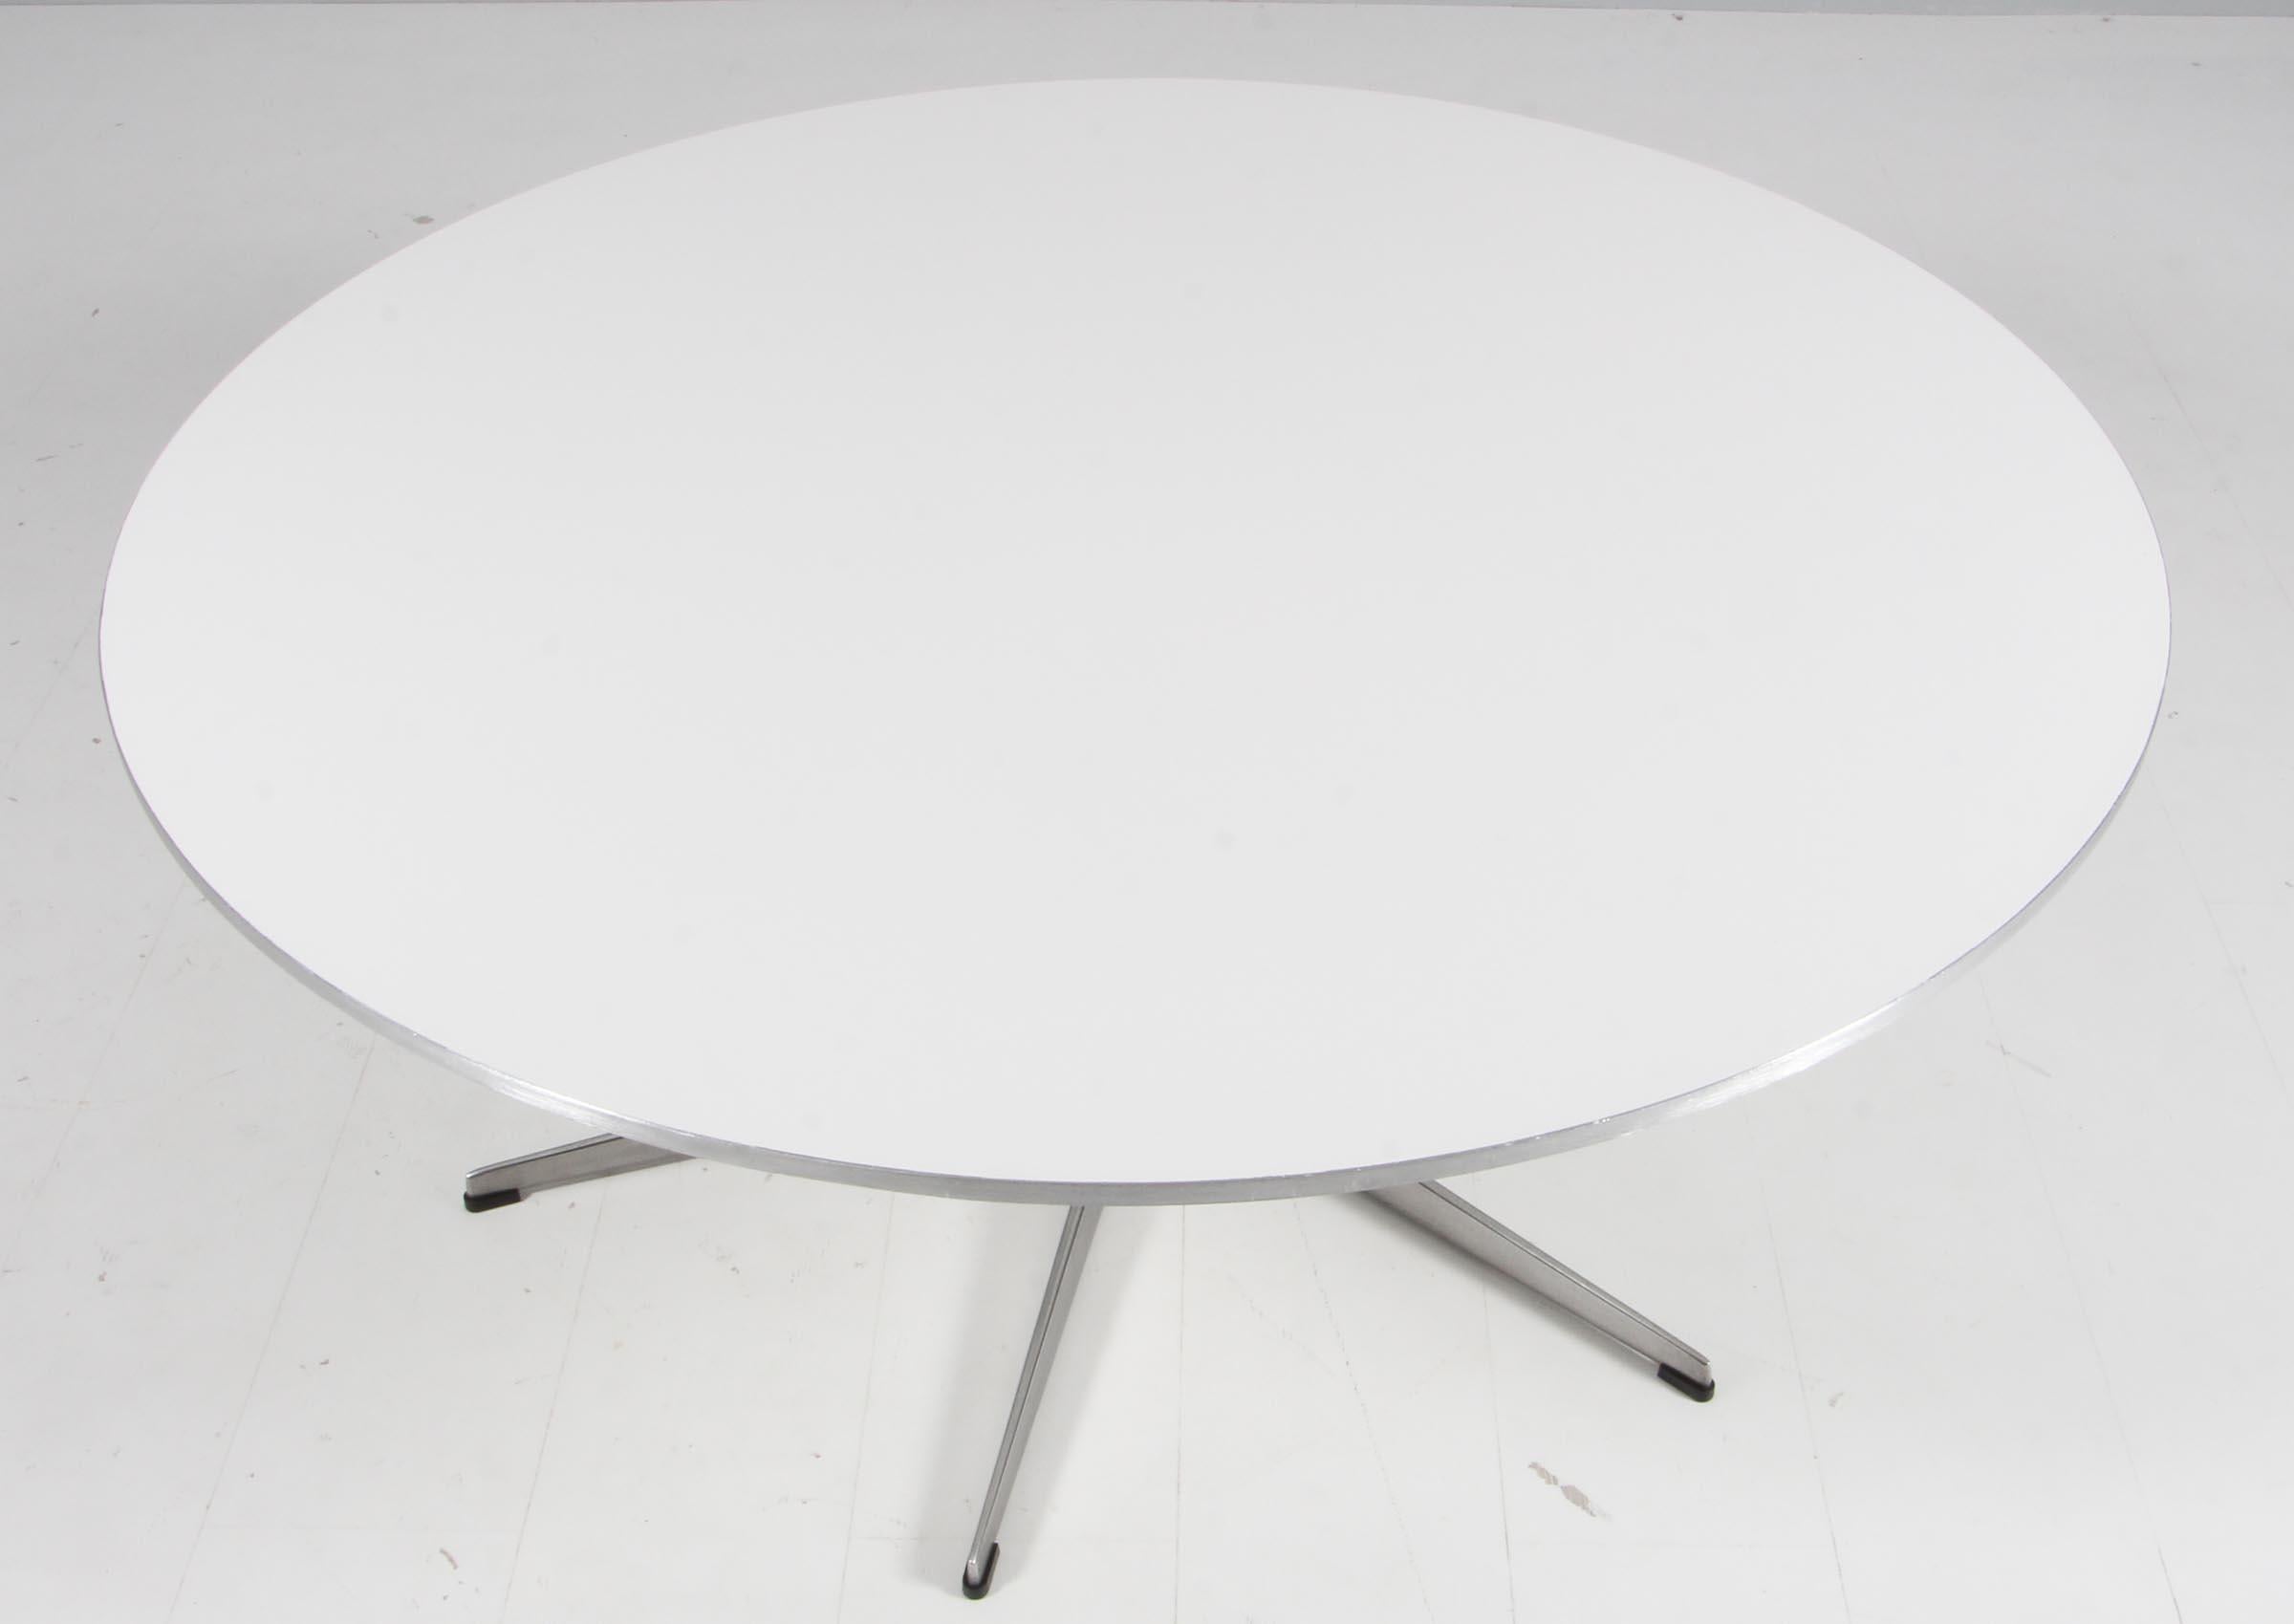 Piet Hein & Arne Jacobsen coffeentable with new laquered white top.

six star base of aluminium and steel.

Made by Fritz Hansen.